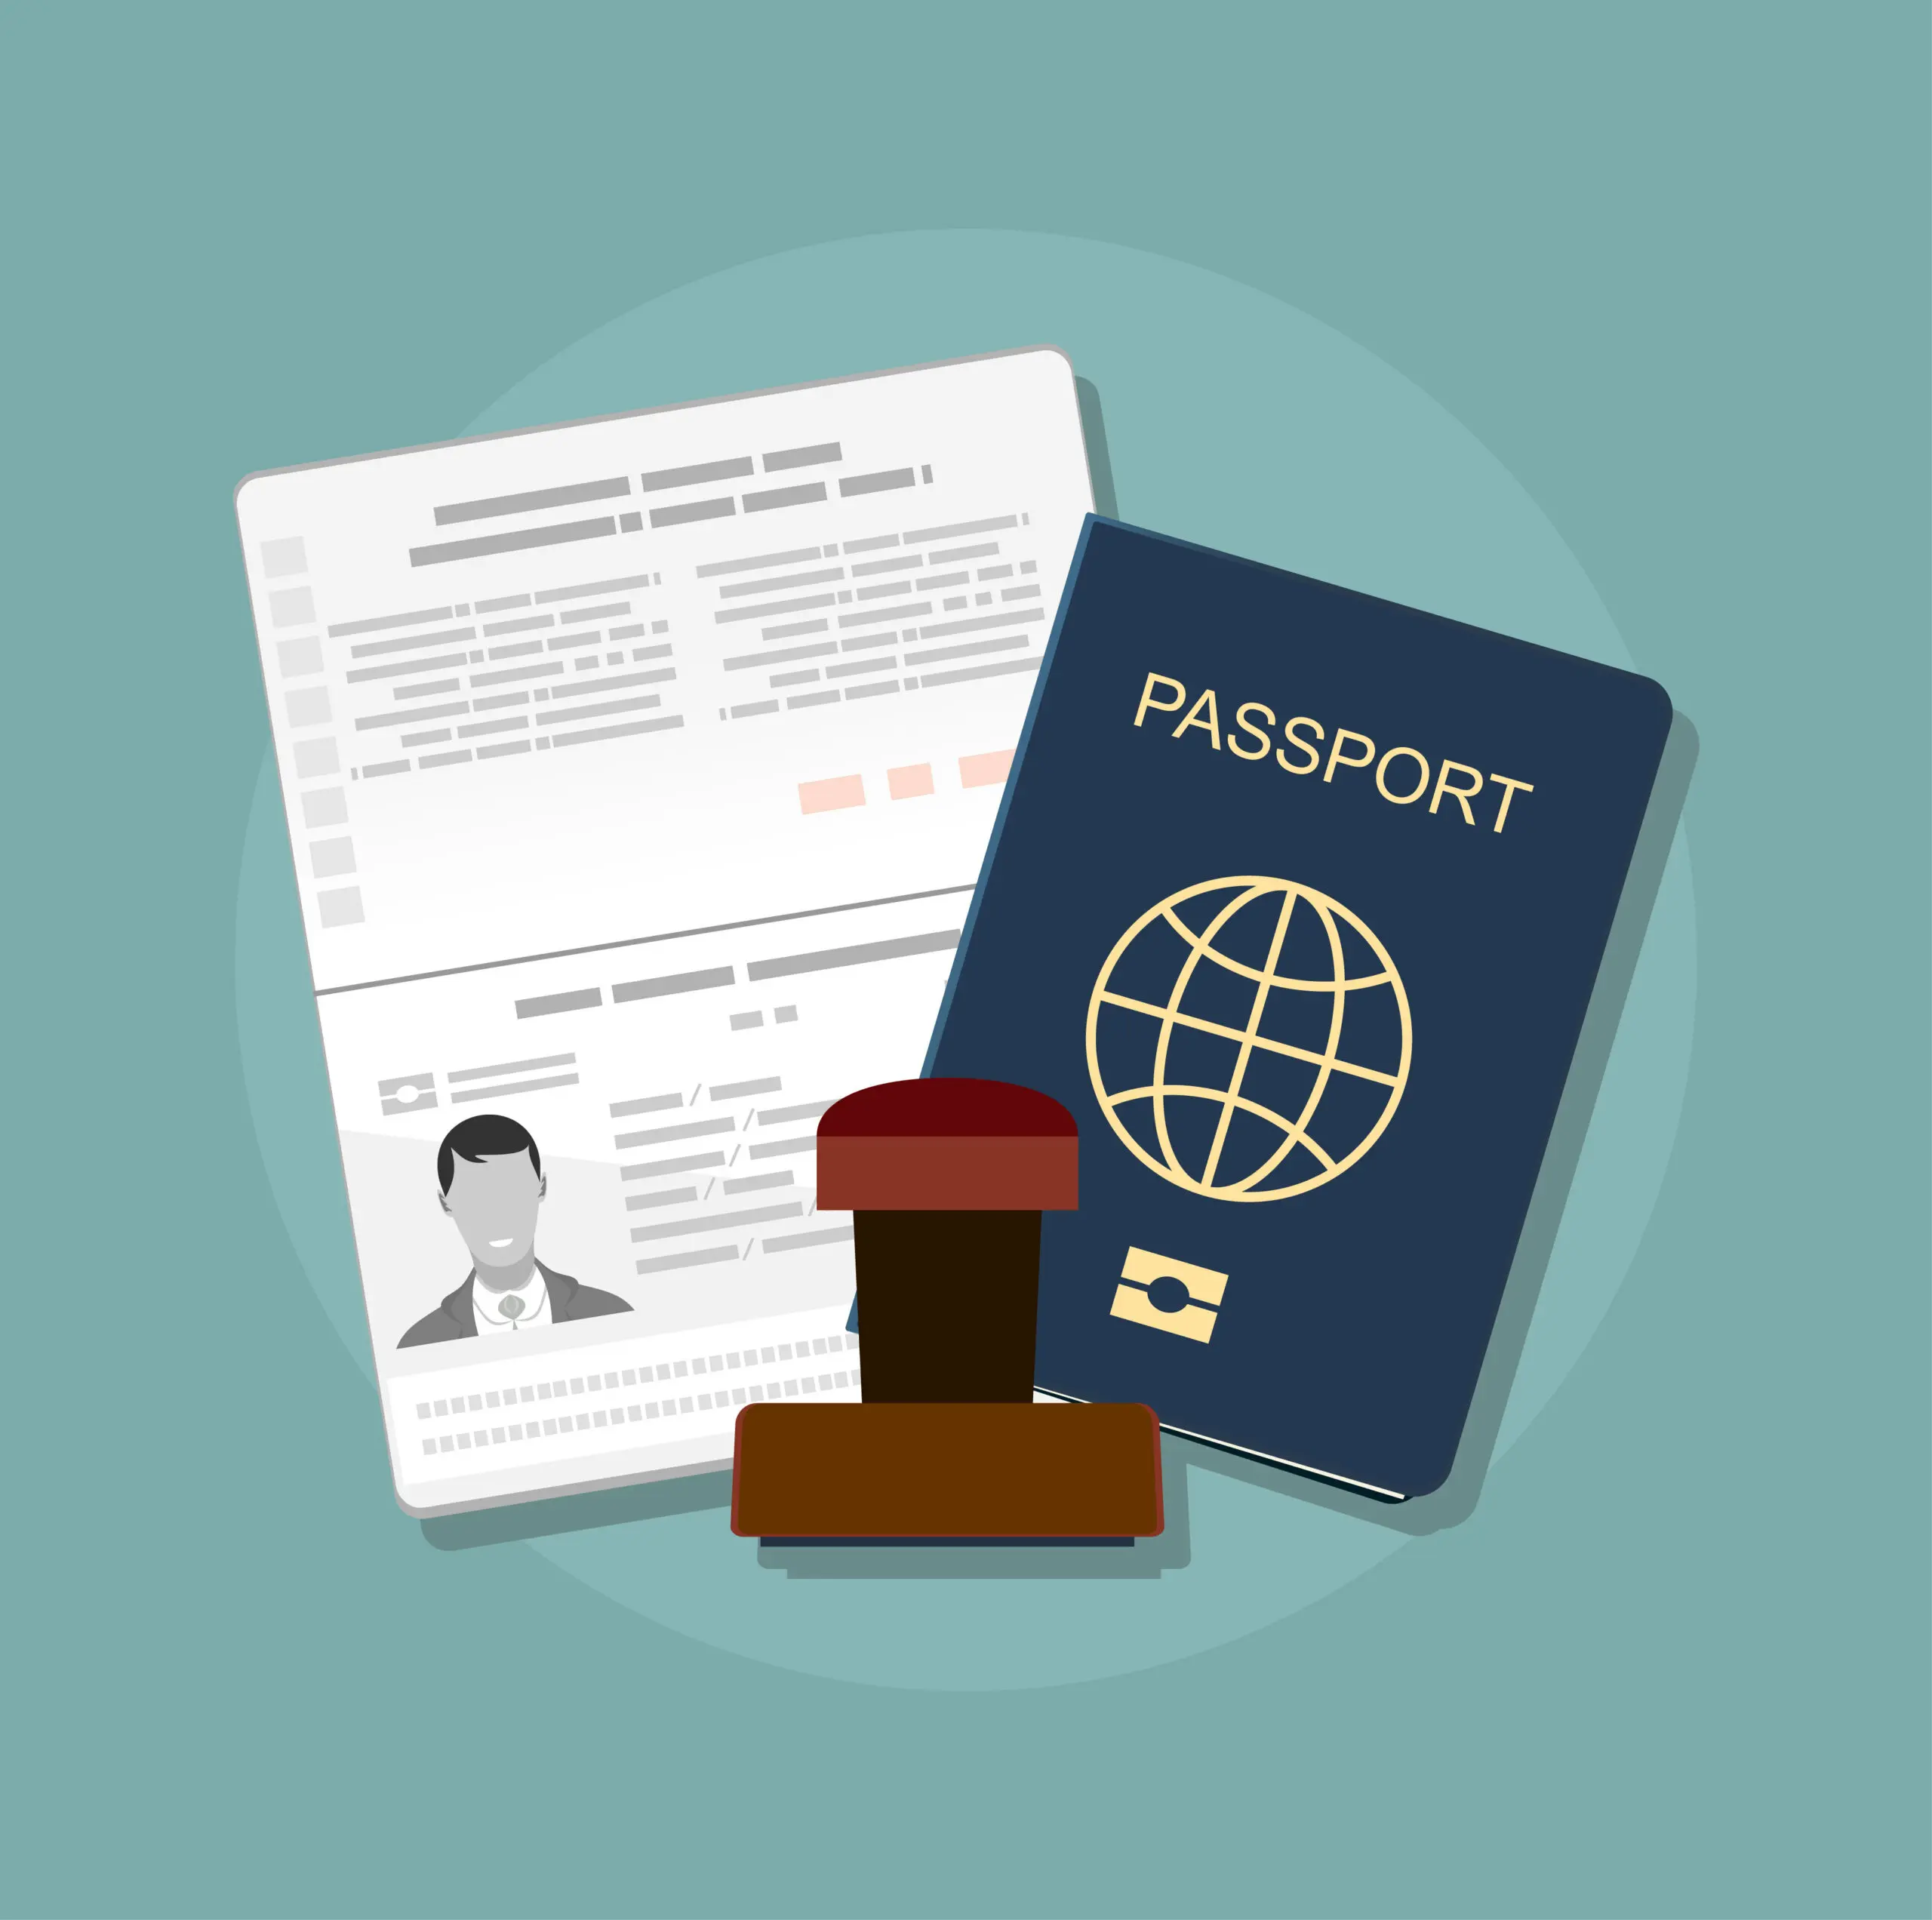 Preferred Suppliers - Passport,With,Biometric,Data.,Identification,Document,And,Stamp,Flat,Vector